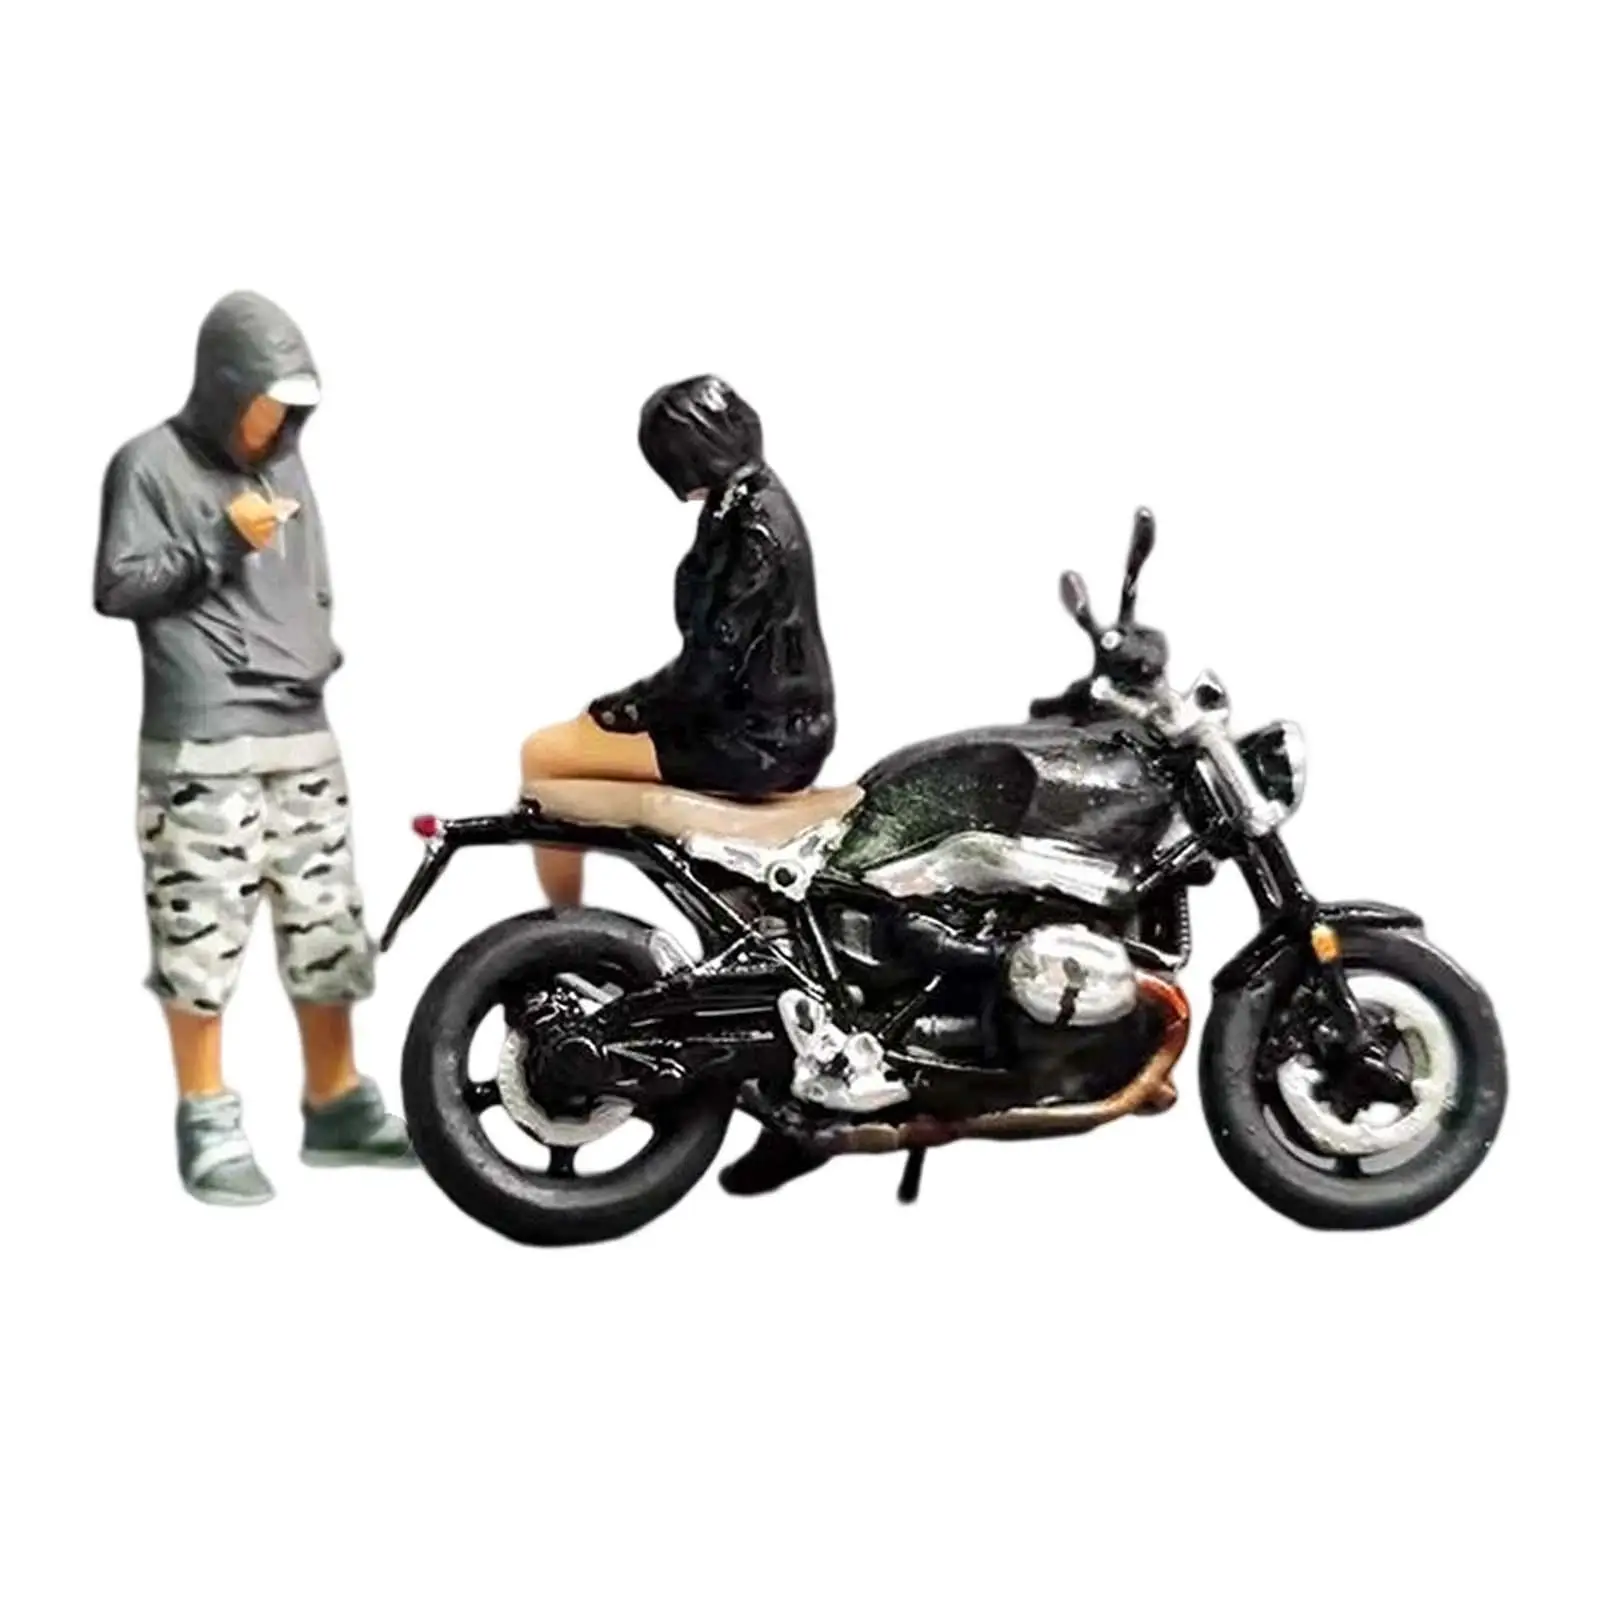 1/64 Figures Motorcycle Street Scene Collections DIY Projects Micro Landscape Tiny People Dioramas Layout Character Model Toy